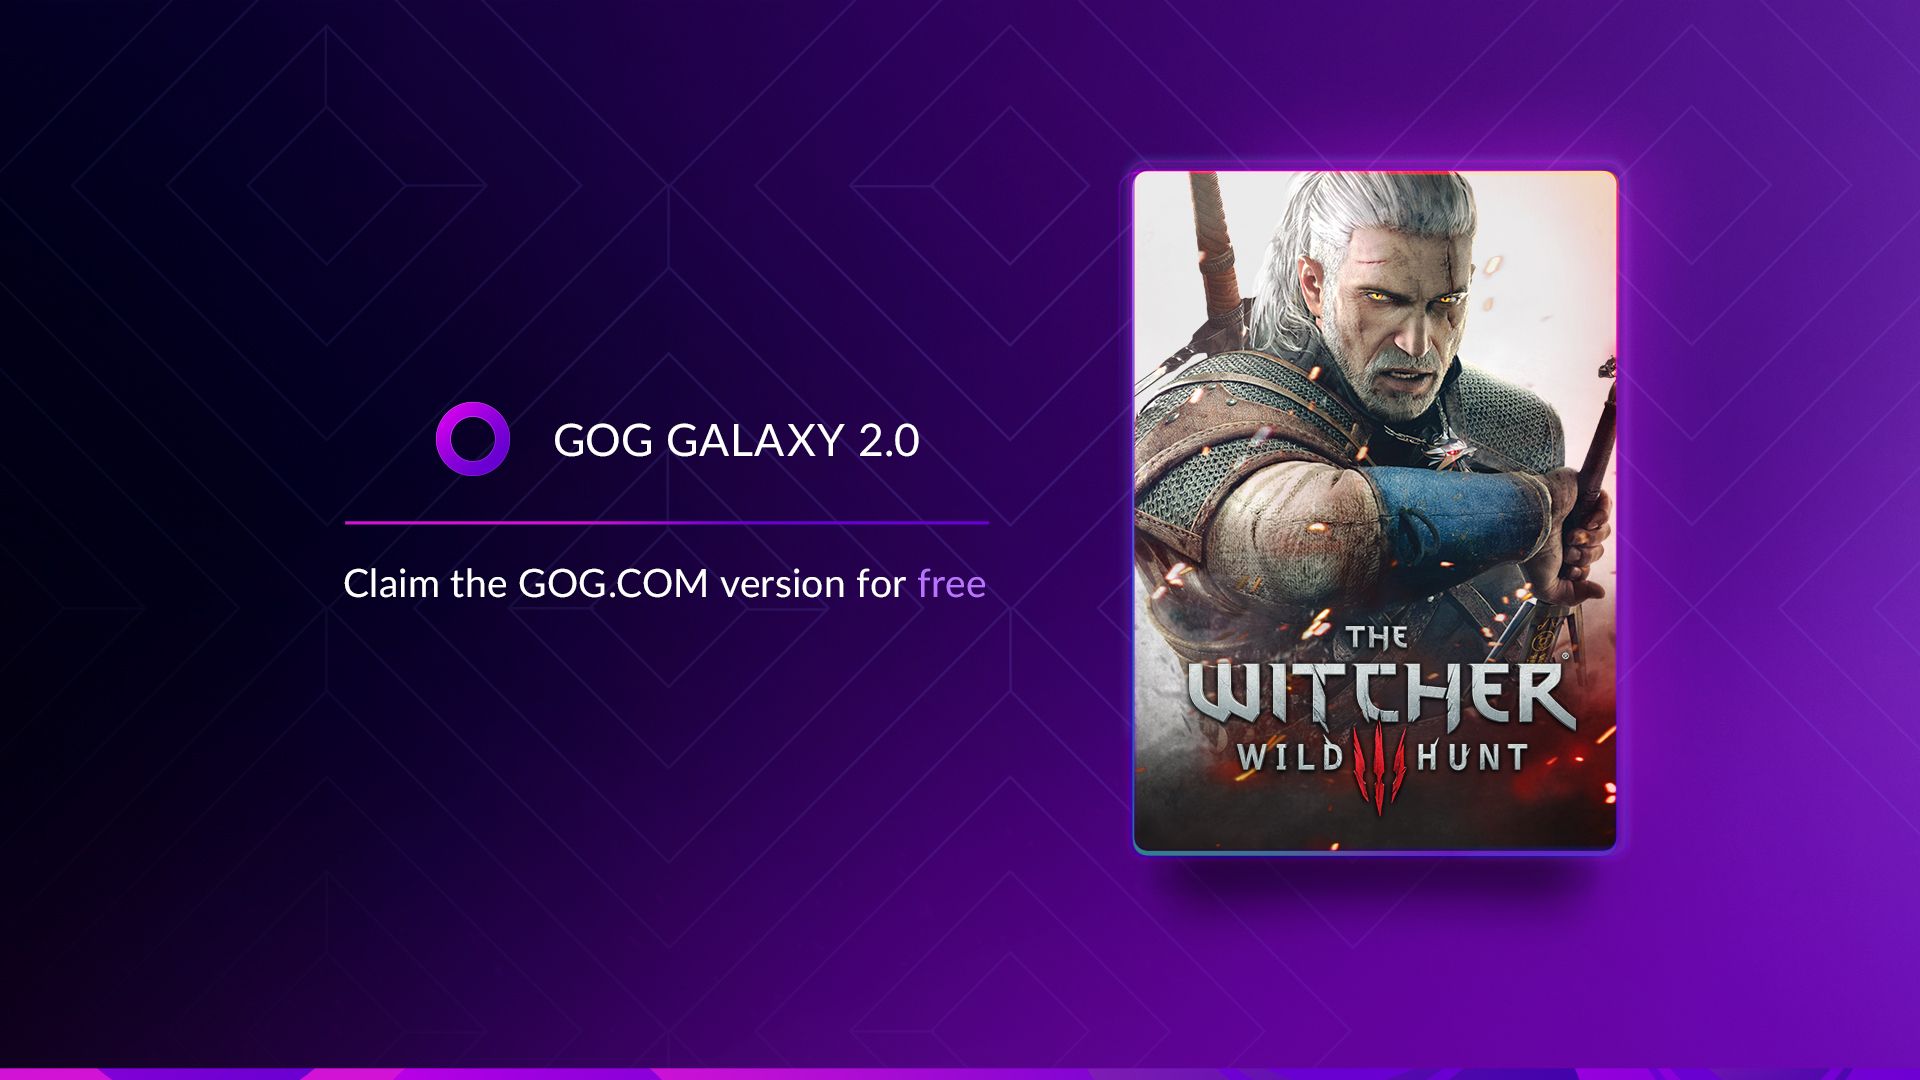 The Witcher 3 GOG GALAXY Deal